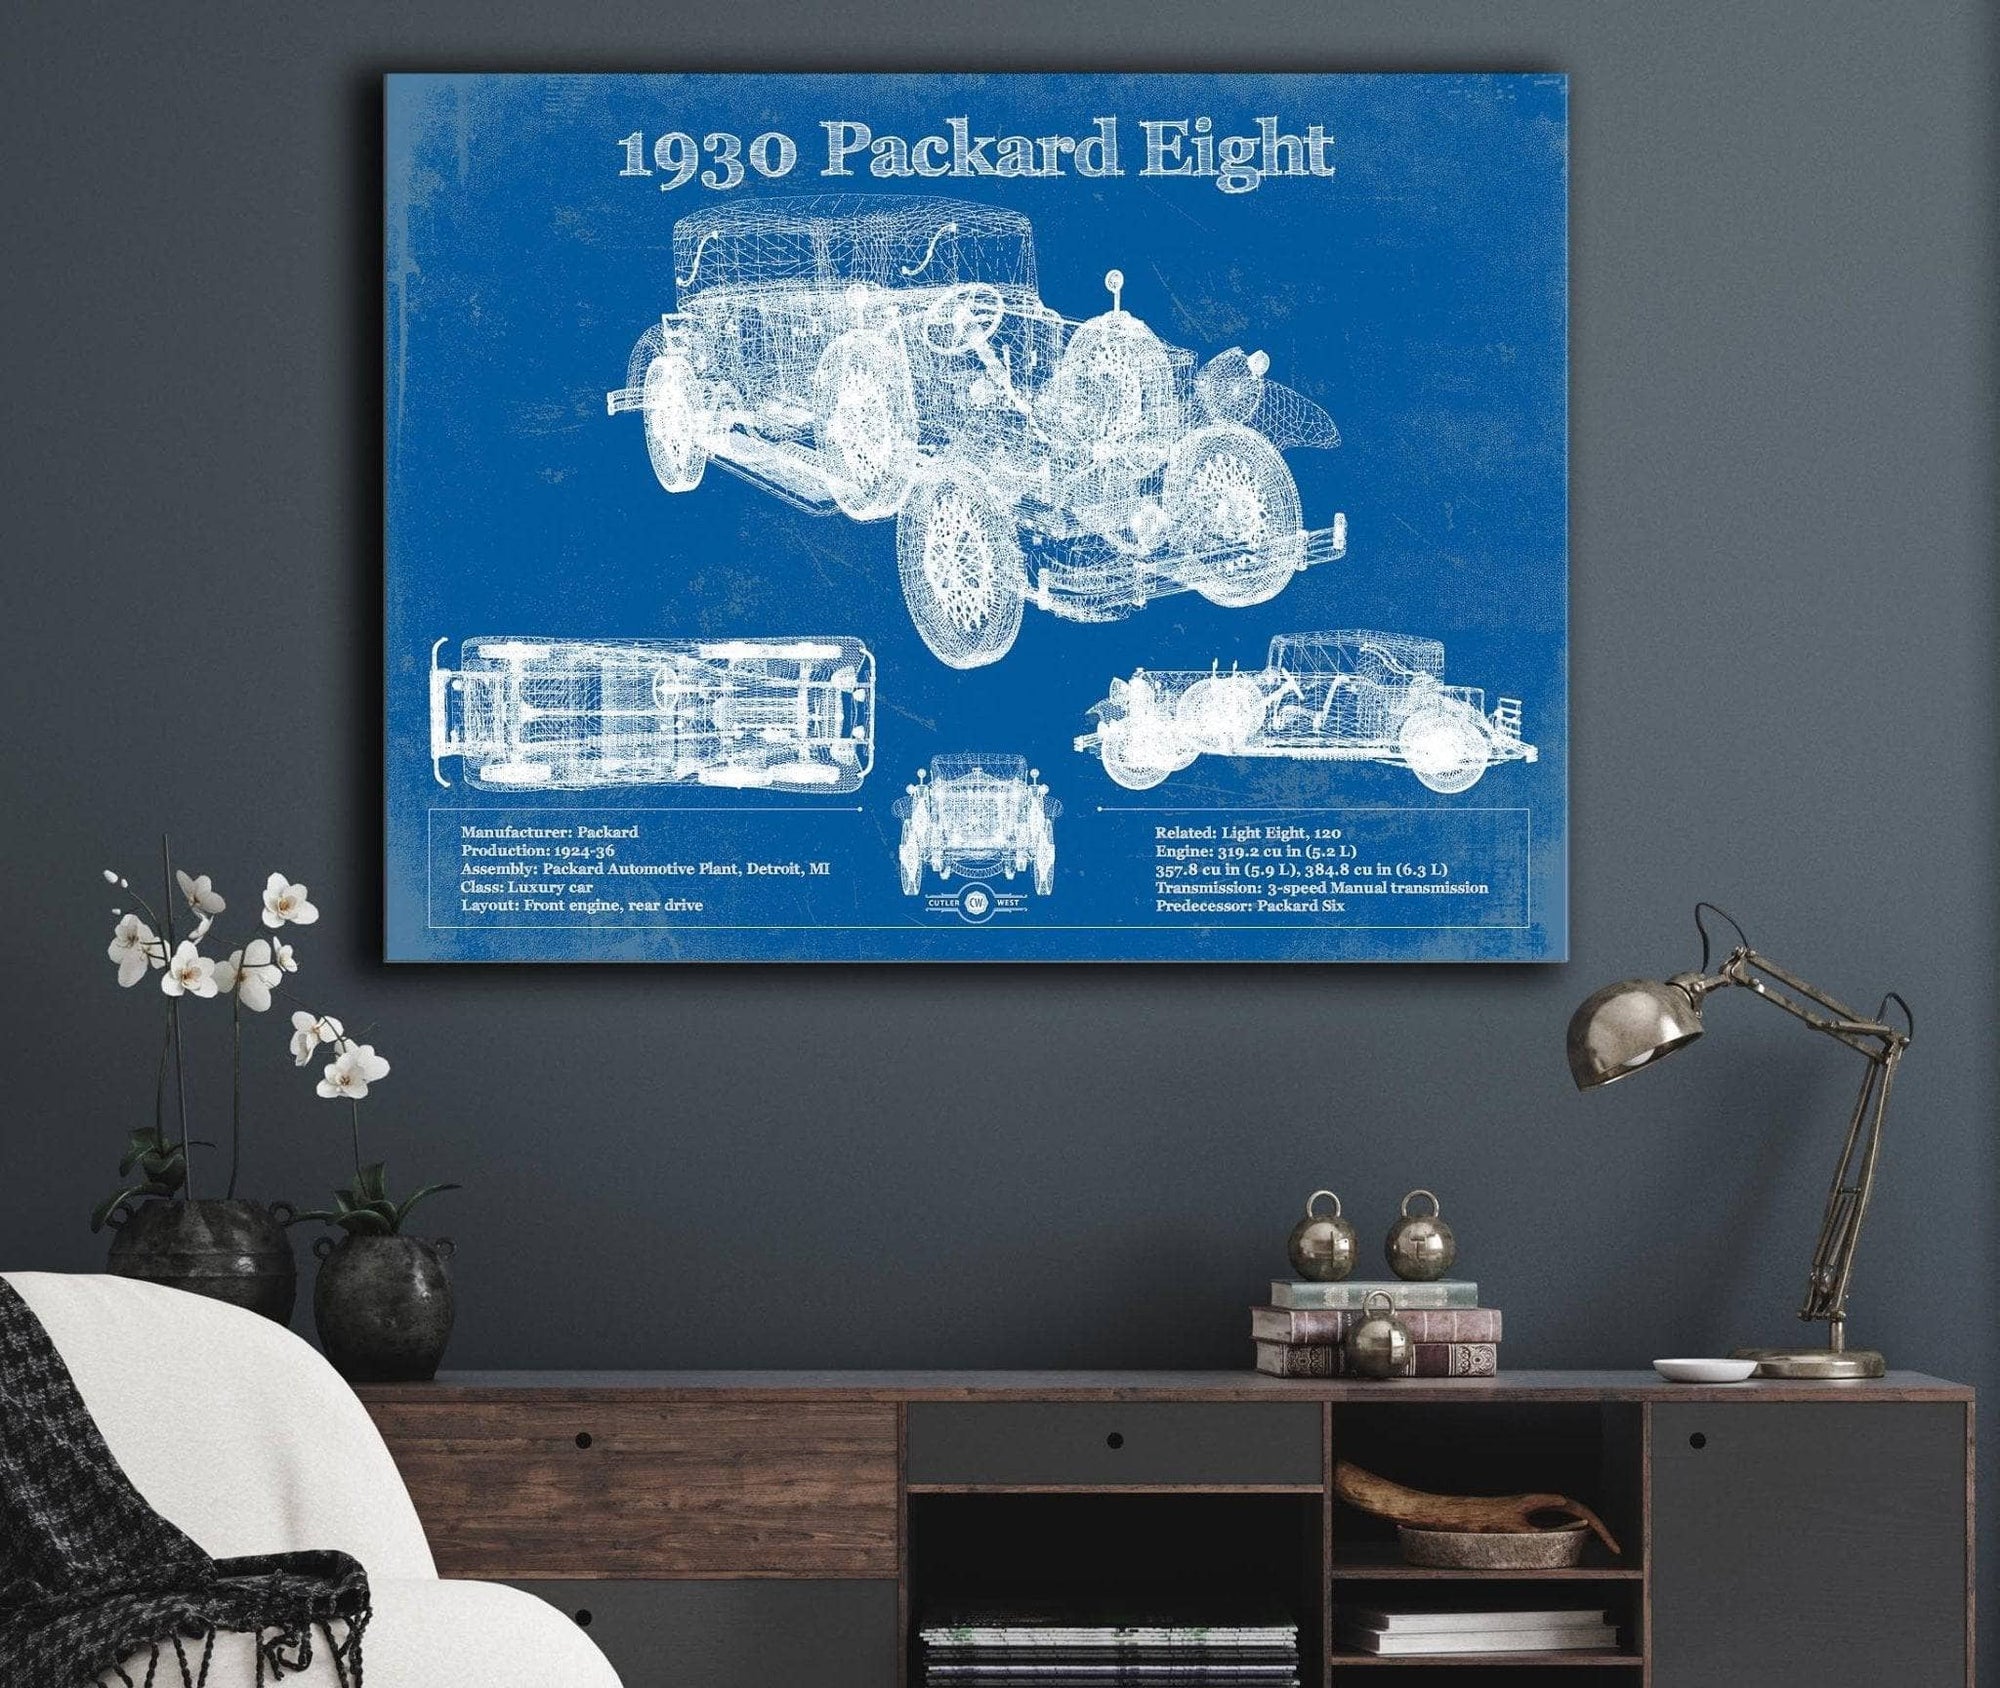 Cutler West Vehicle Collection 1930 Packard Eight Vintage Blueprint Auto Print